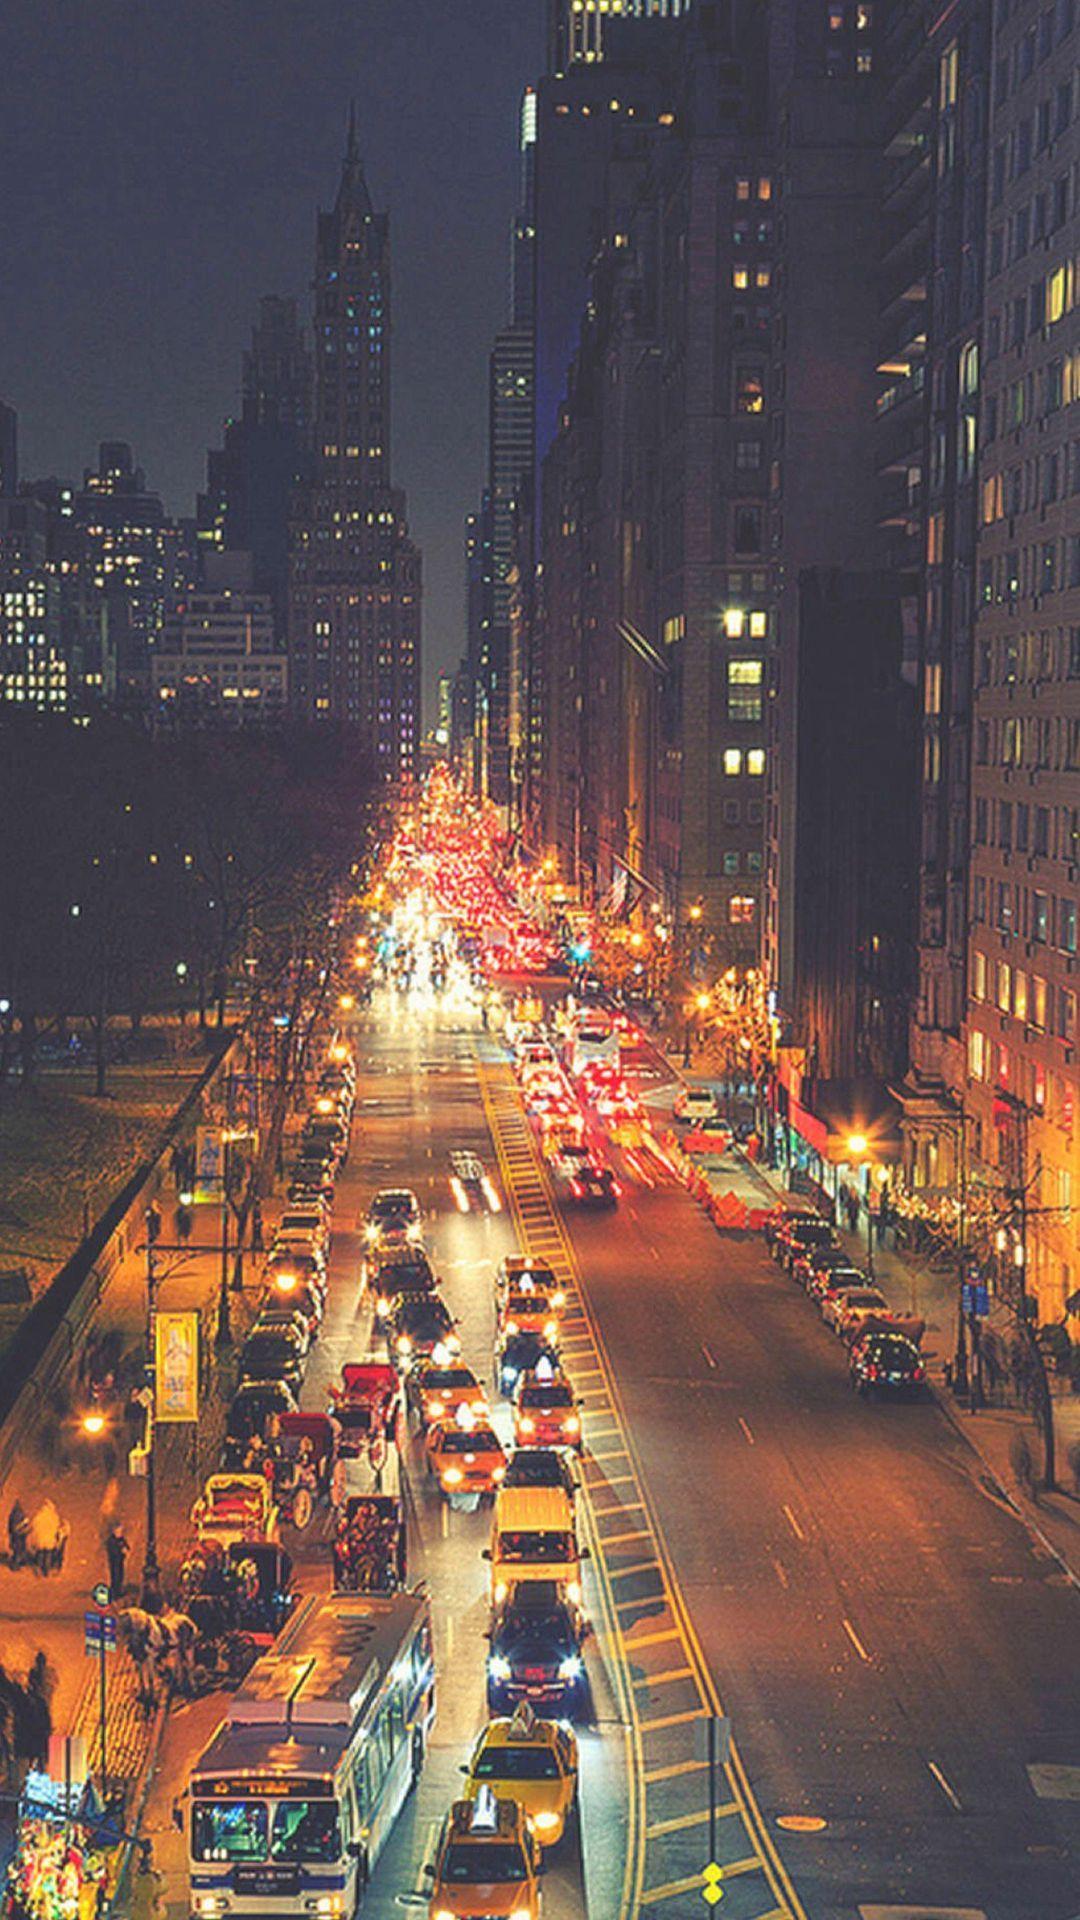 New York Night Iphone Wallpapers Top Free New York Night Iphone Backgrounds Wallpaperaccess